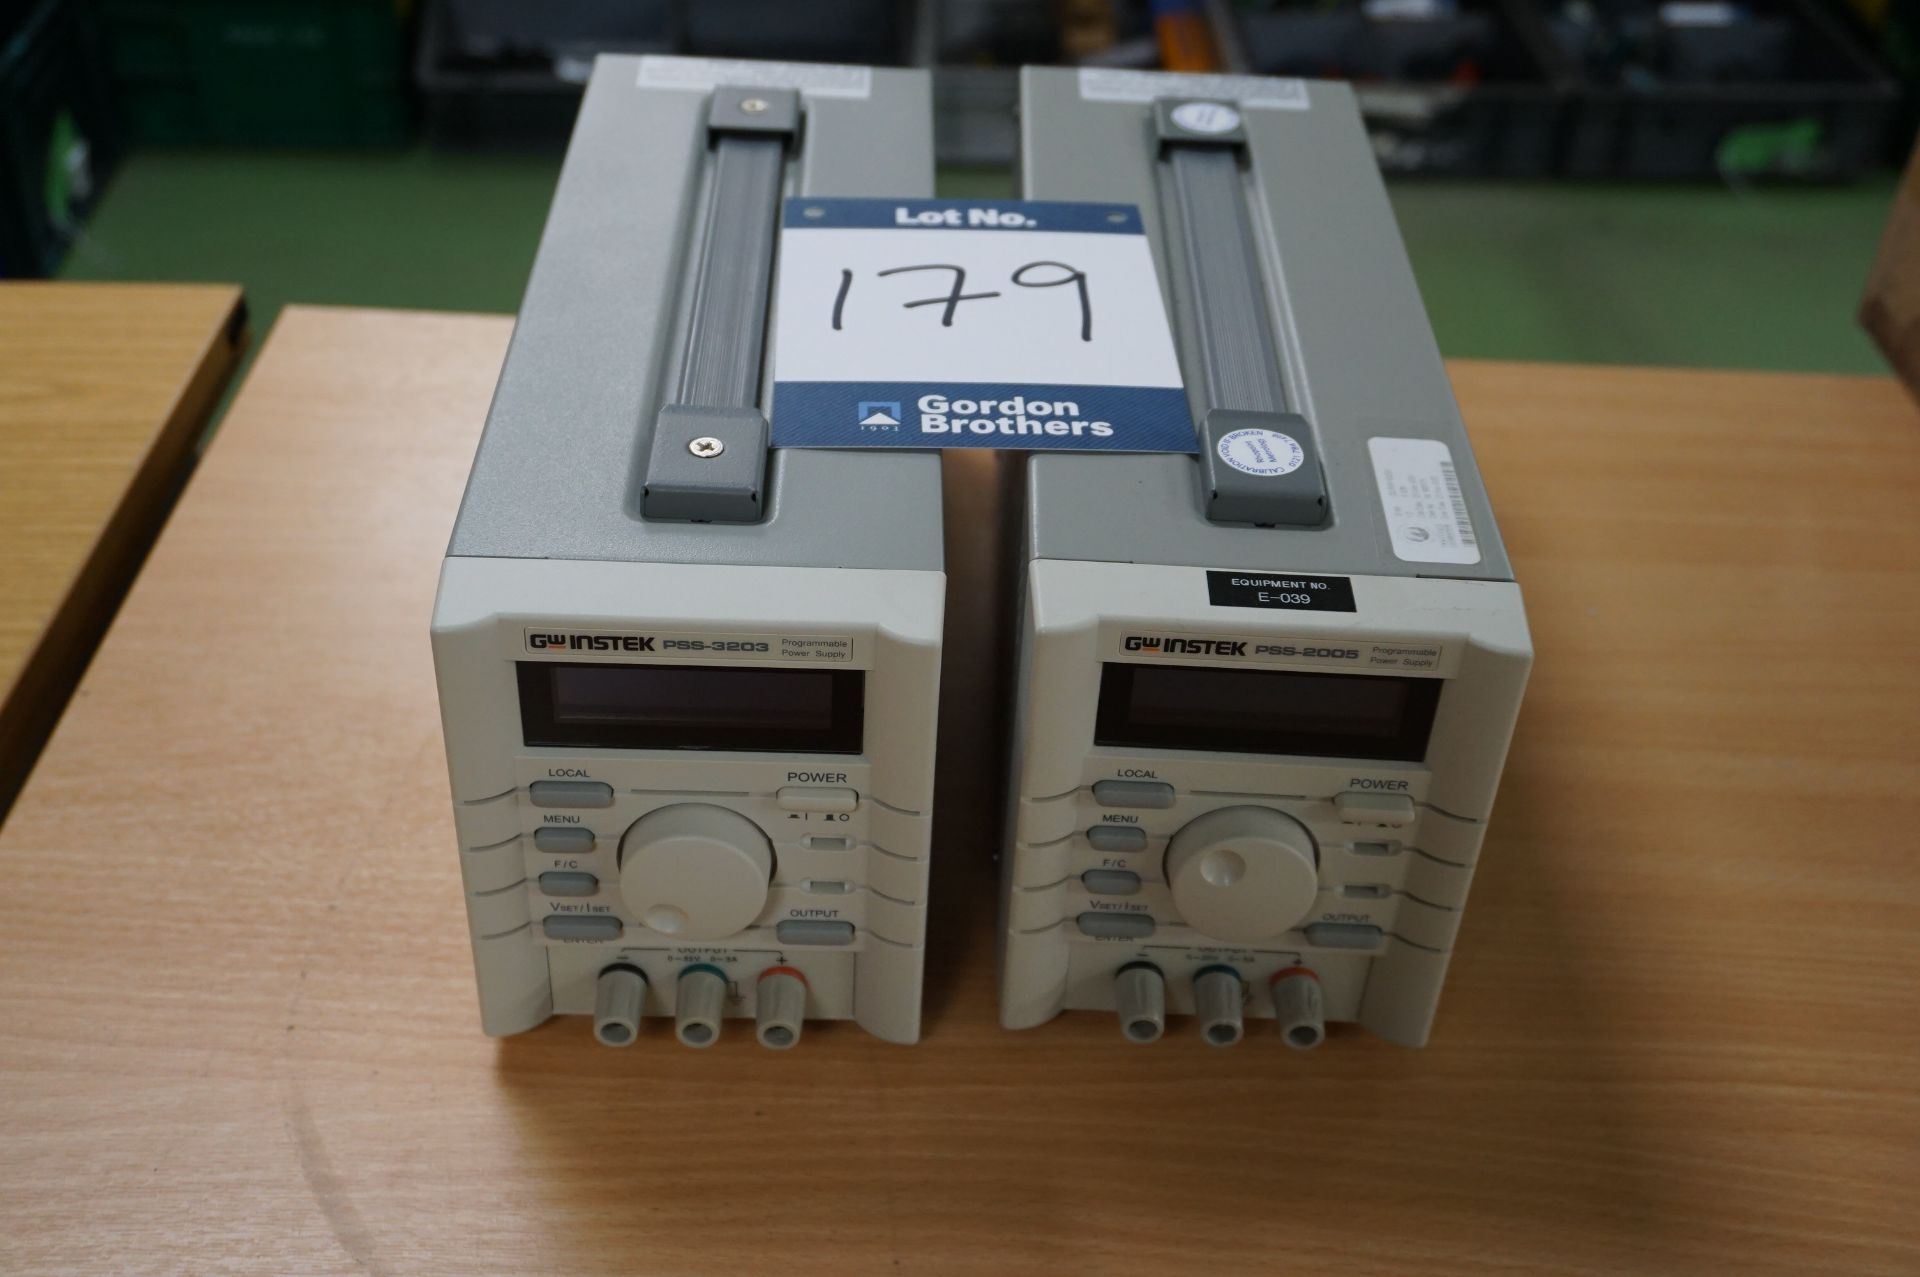 1 x GW Instek PSS-3203 programmable power supply and 1 x GW Instek PSS-2005 programmable power suppl